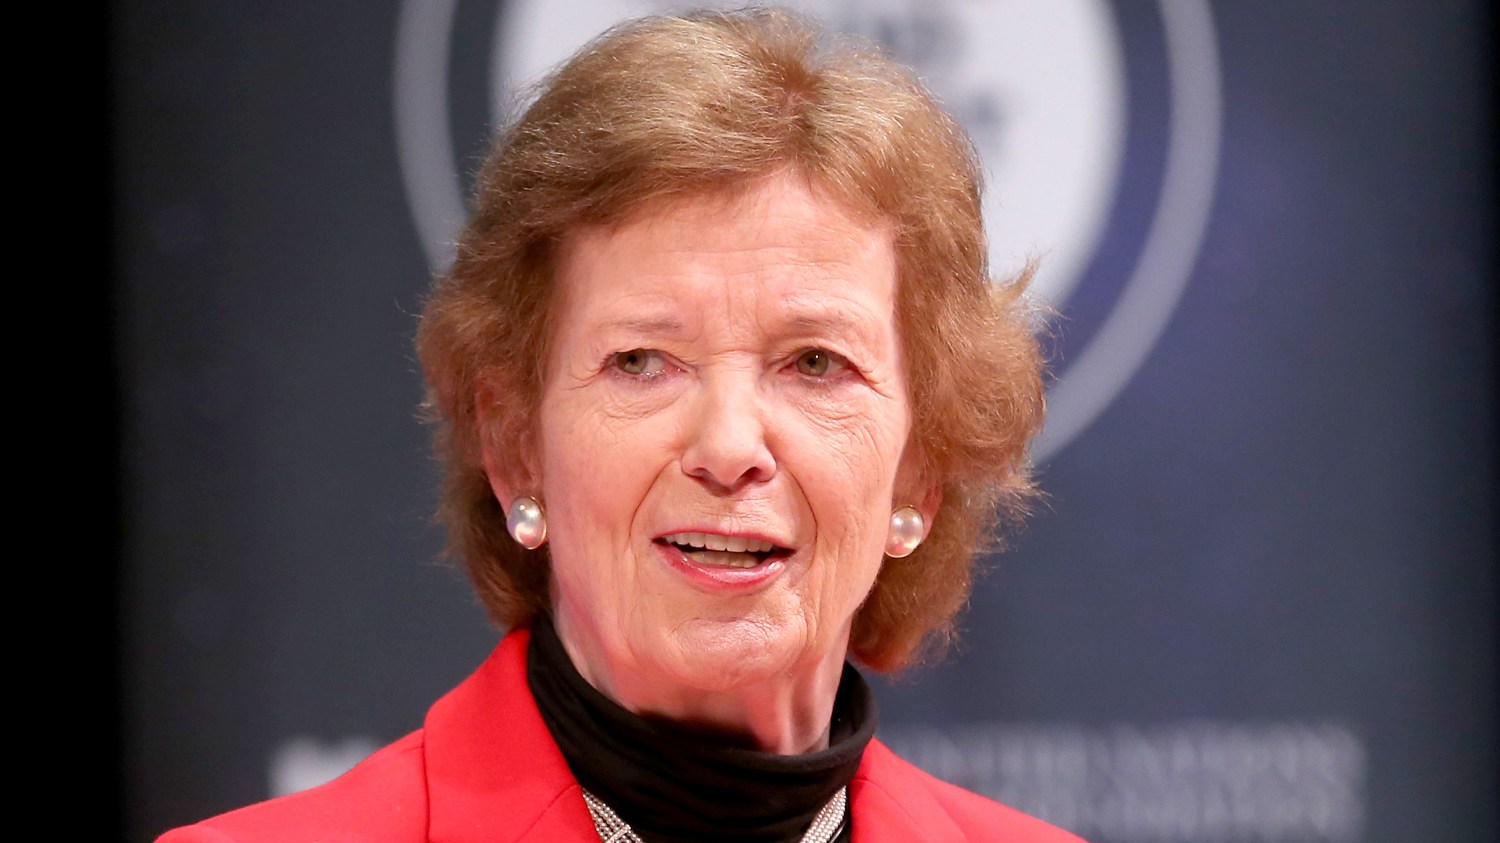 There’s something about Mary Robinson